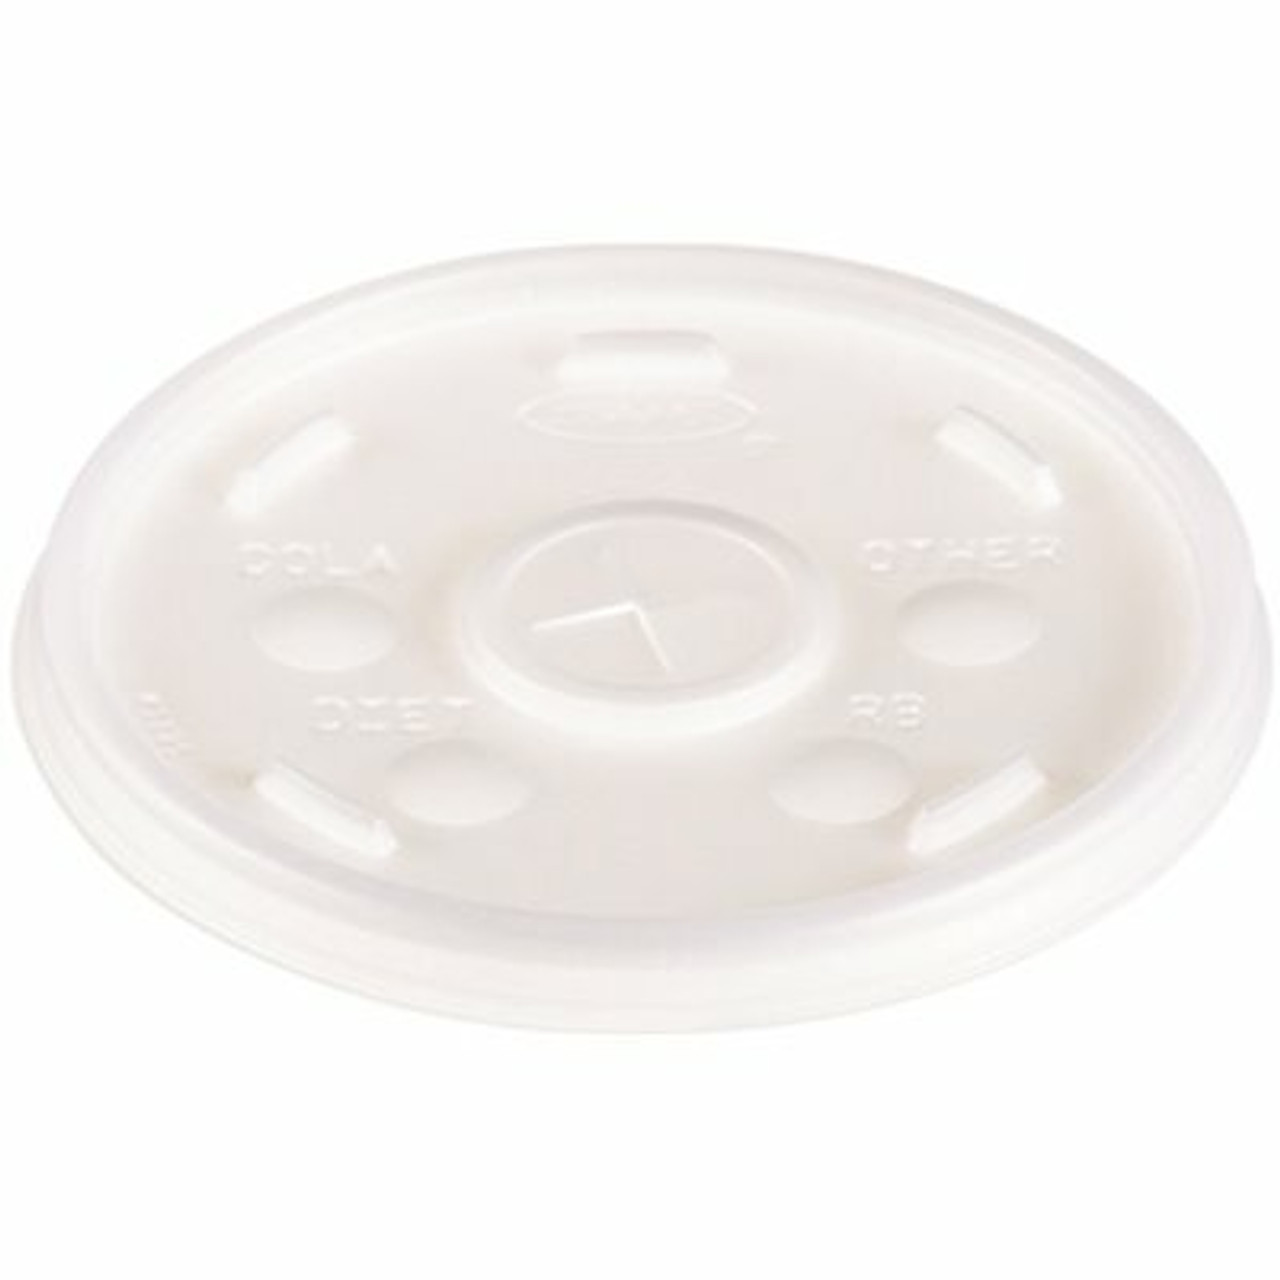 Dart Straw Slotted Lid With Identification For 16-Series Cups, Translucent (1000 Per Case)